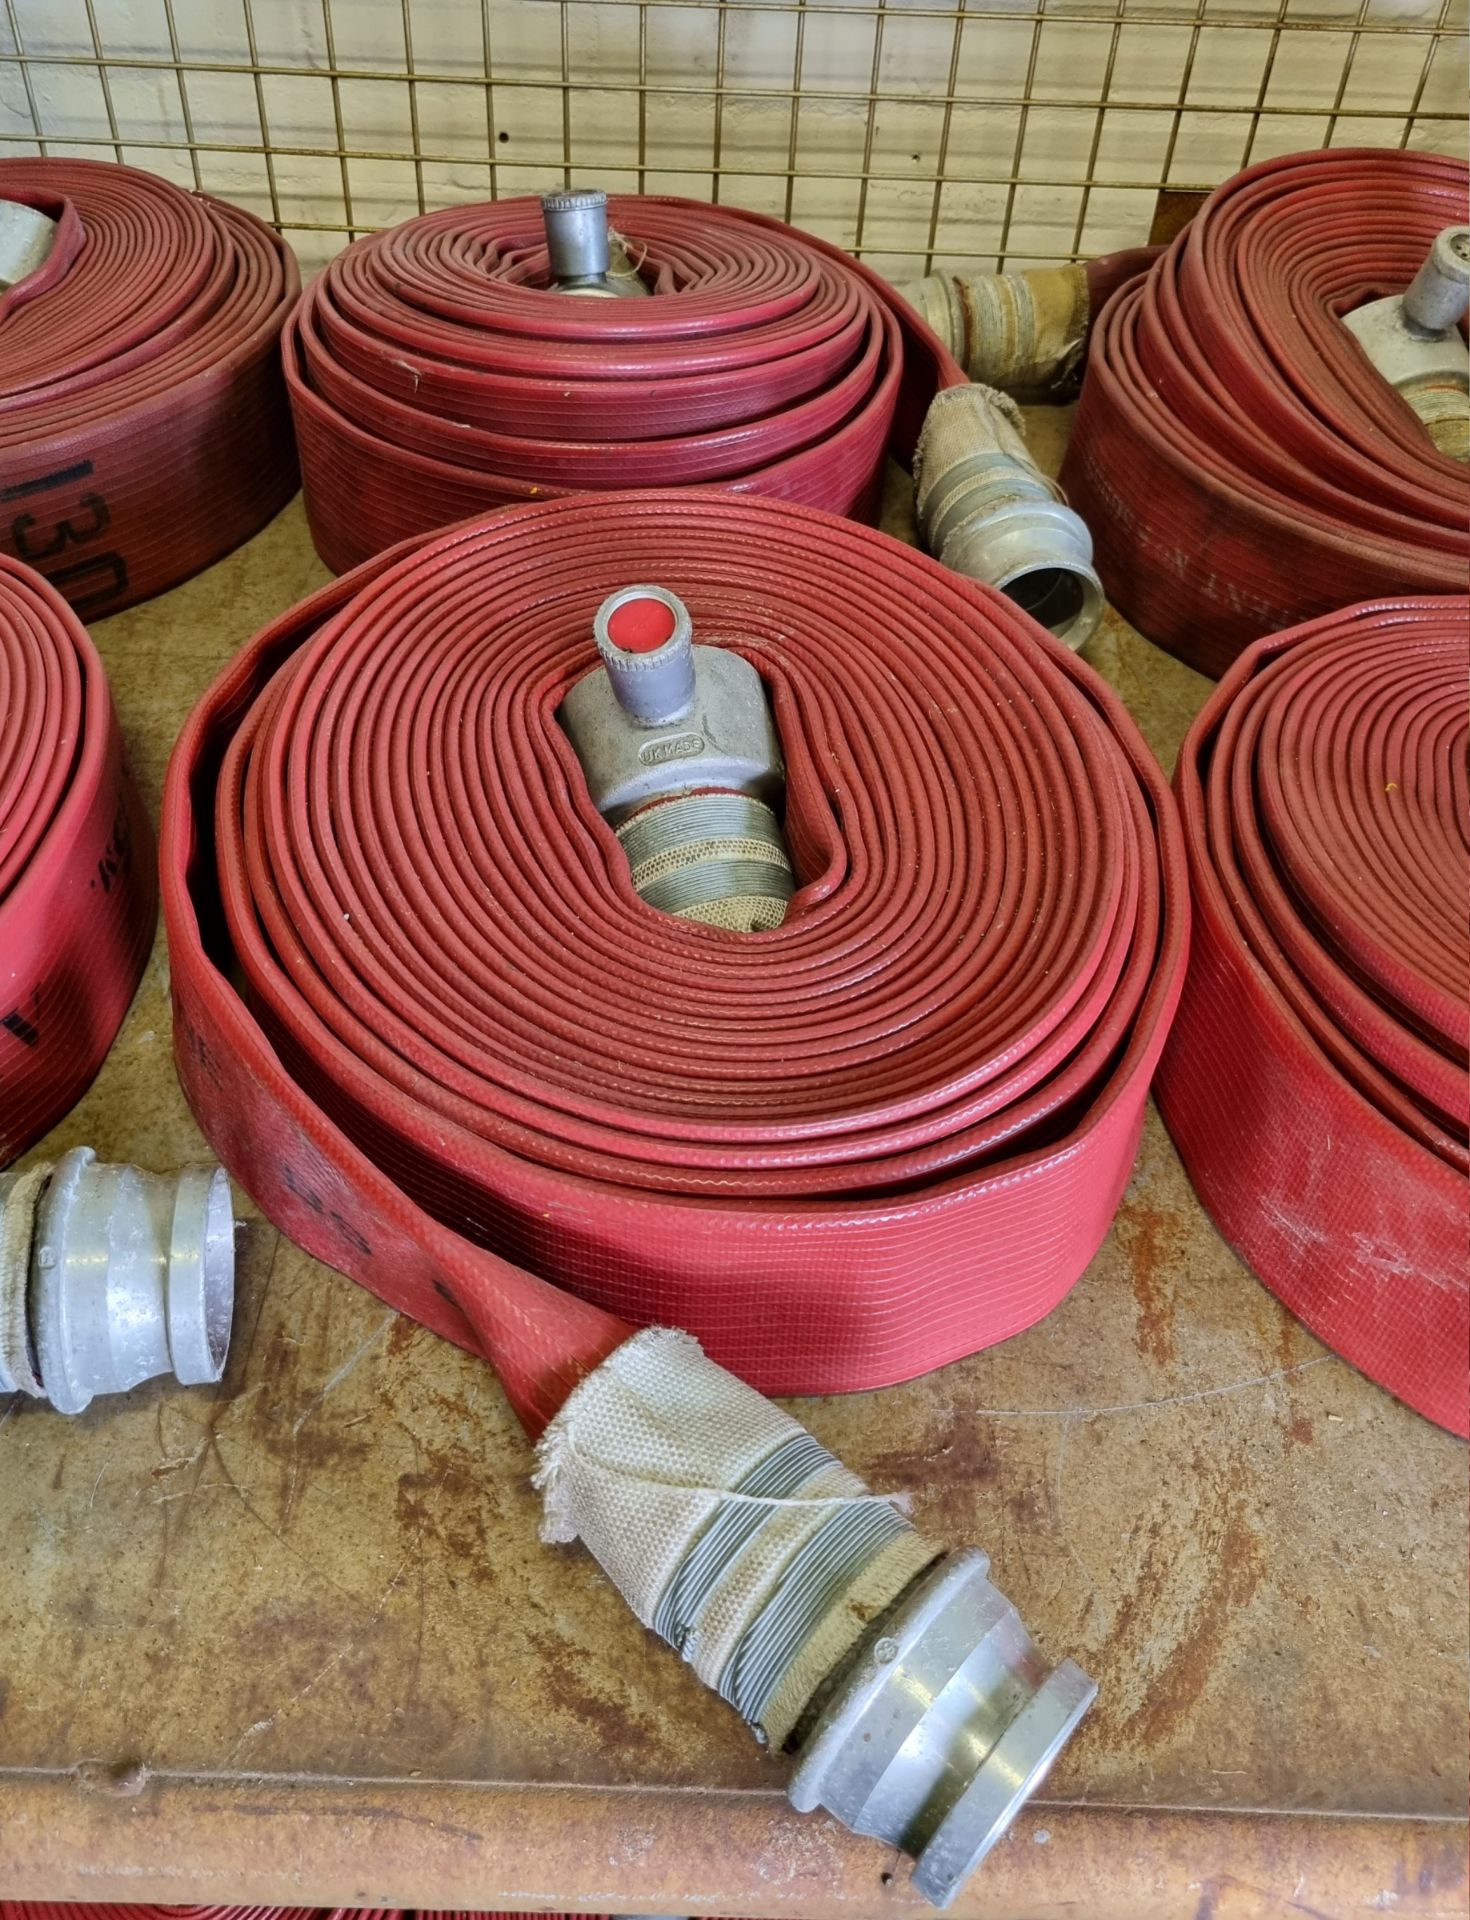 6x Angus Duraline 64mm lay flat hoses with couplings - approx 15m in length - Bild 4 aus 5